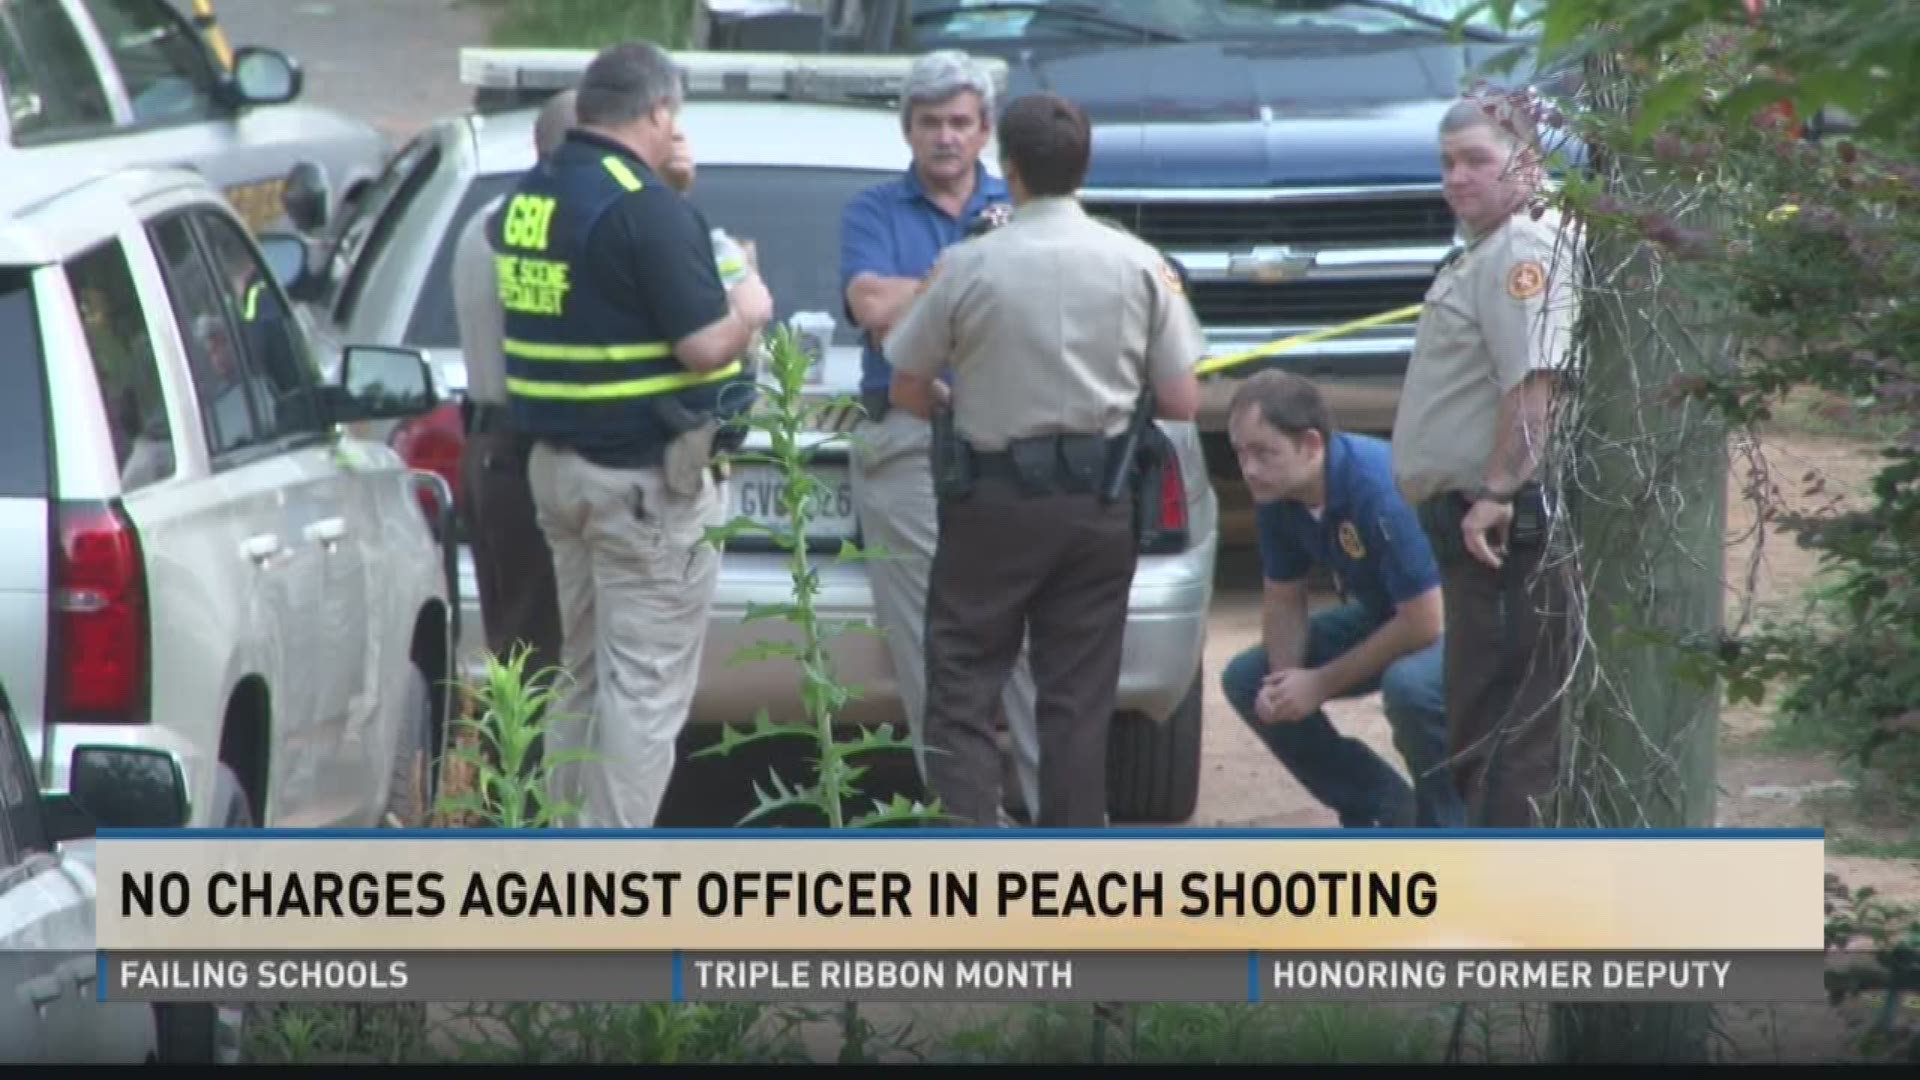 No charges against officer in Peach shooting